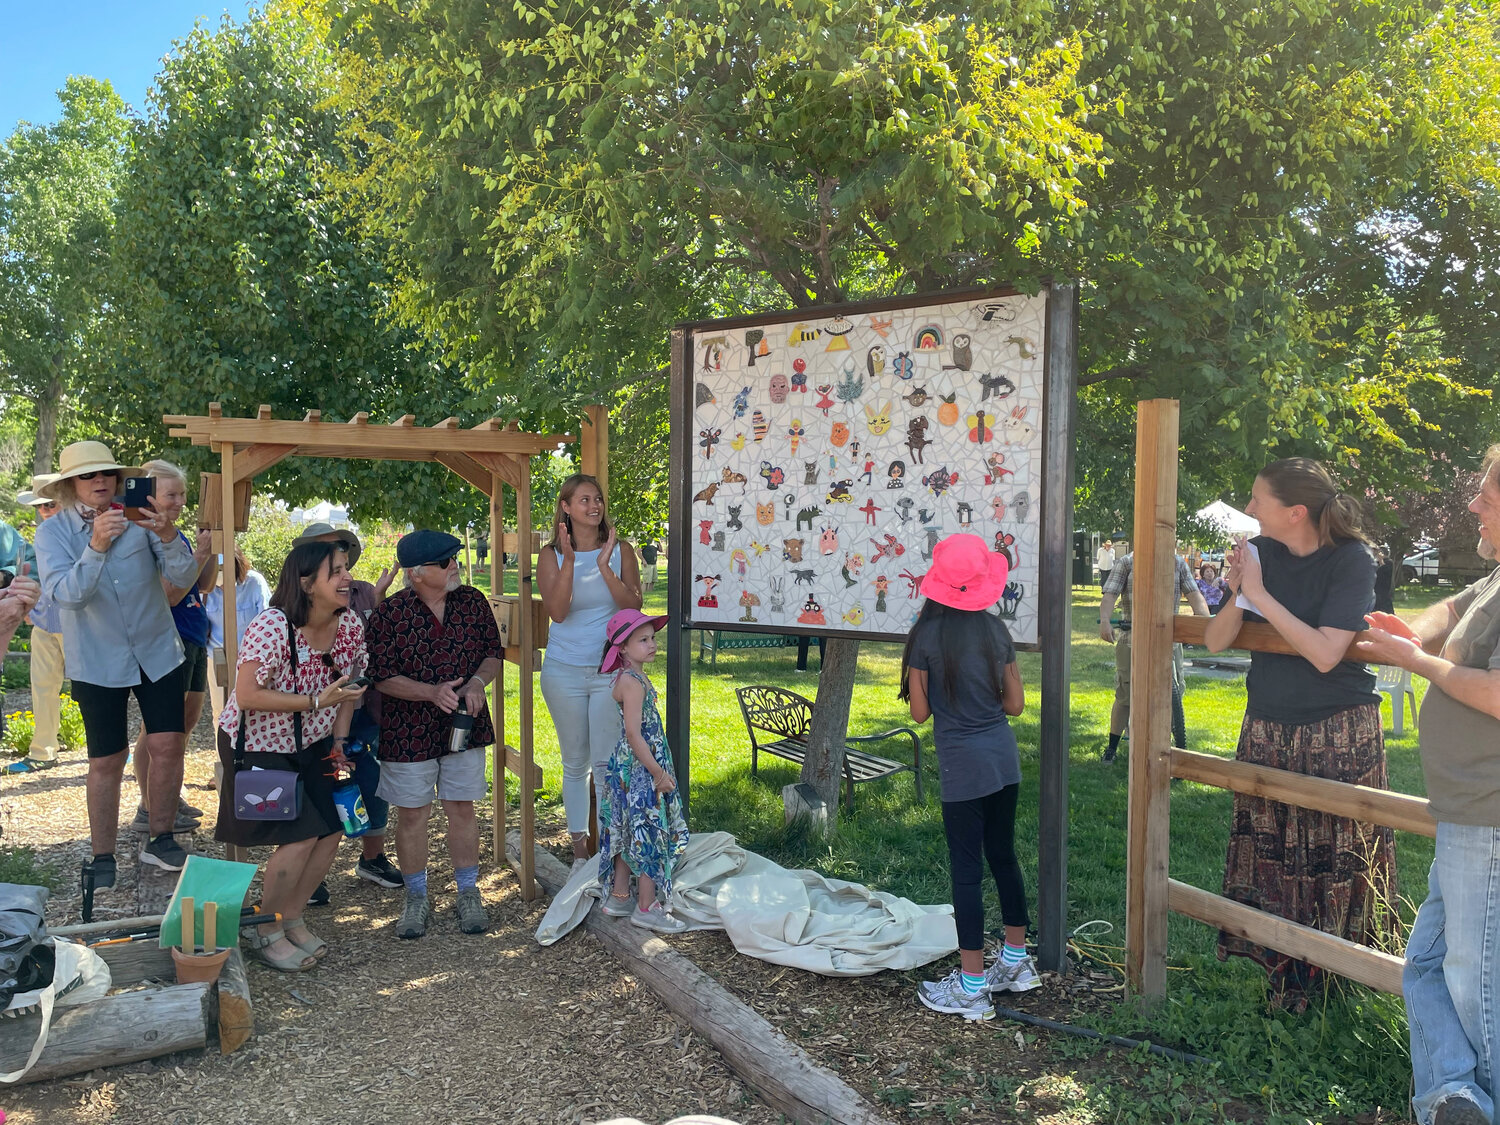 A mural created my dozens of community members was unveiled at the Children's Garden at the Corrales Community Library on July 8. (T.S. Last/Corrales Comment)